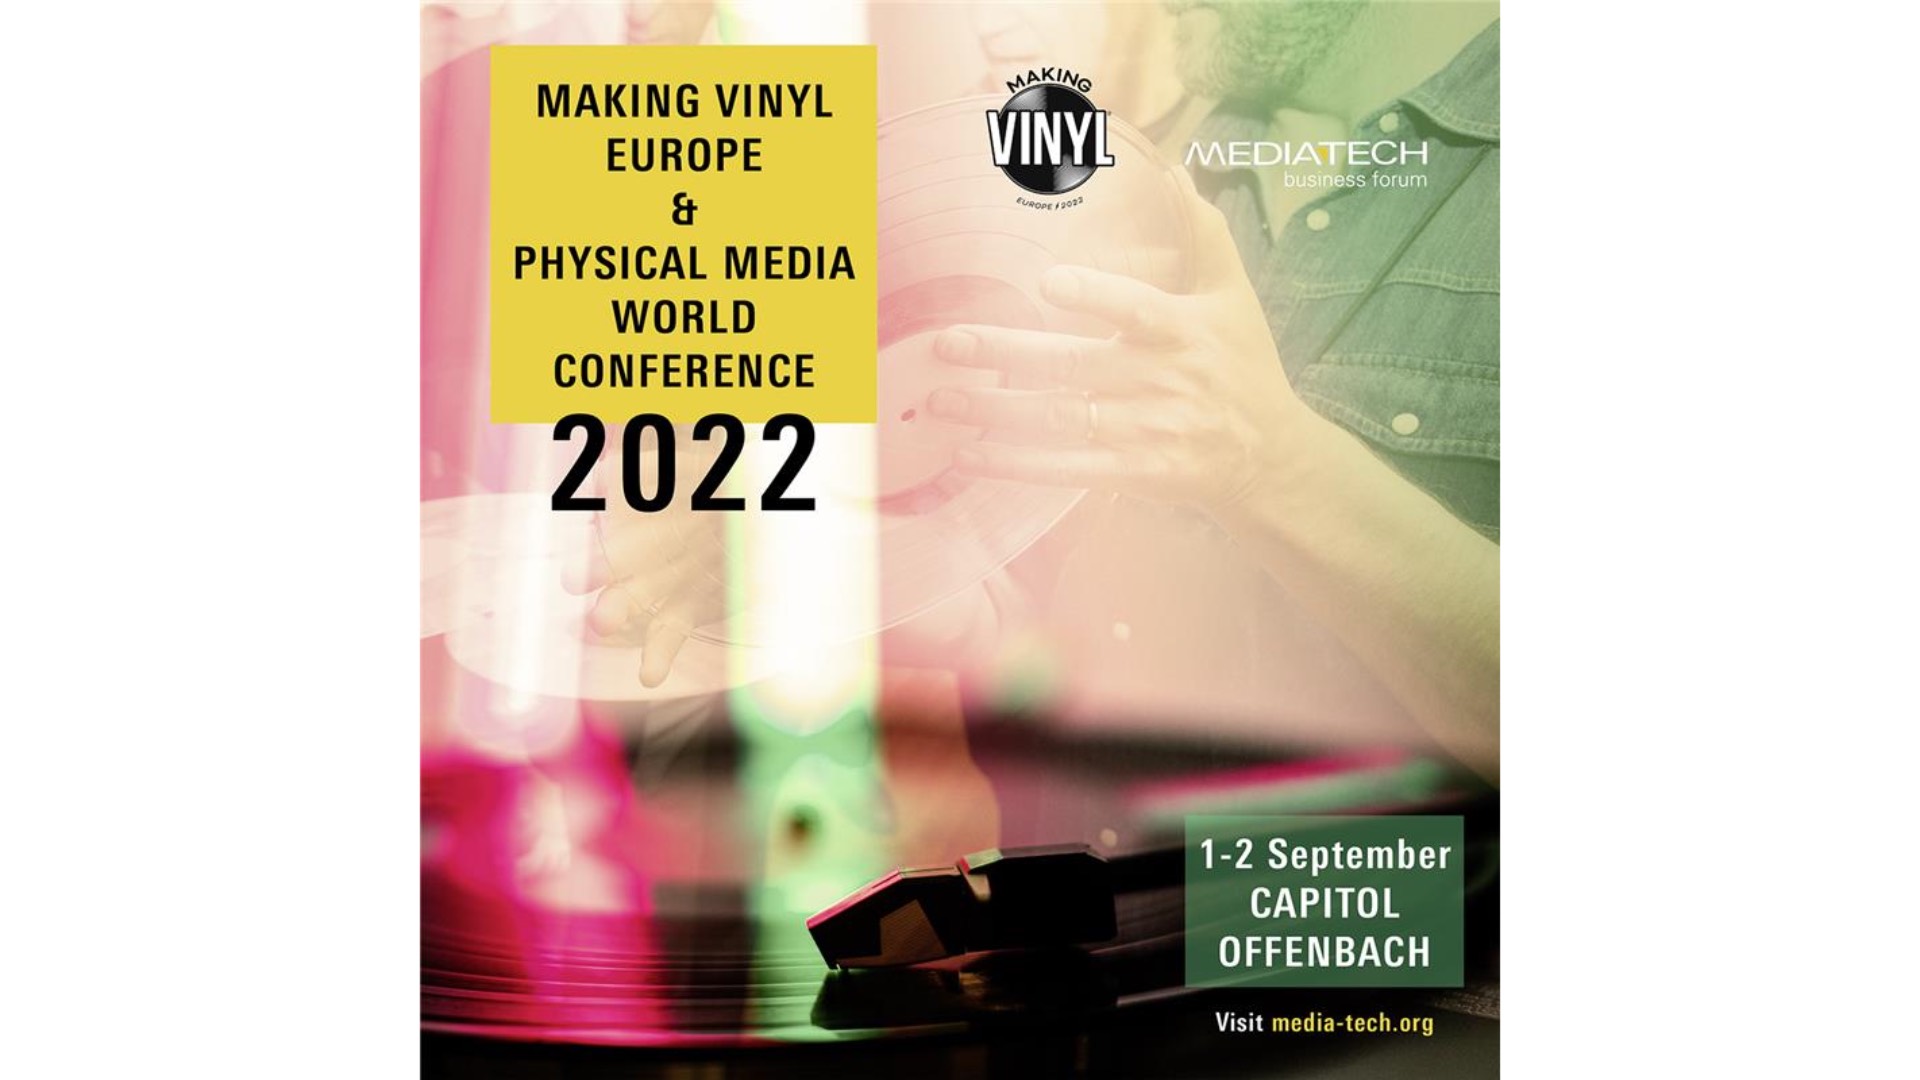 The event is only open to expert visitors will take place in Offenbach, Germany on September 1 and 2, 2022. (Image Credit: Making Vinyl/Media-Tech)